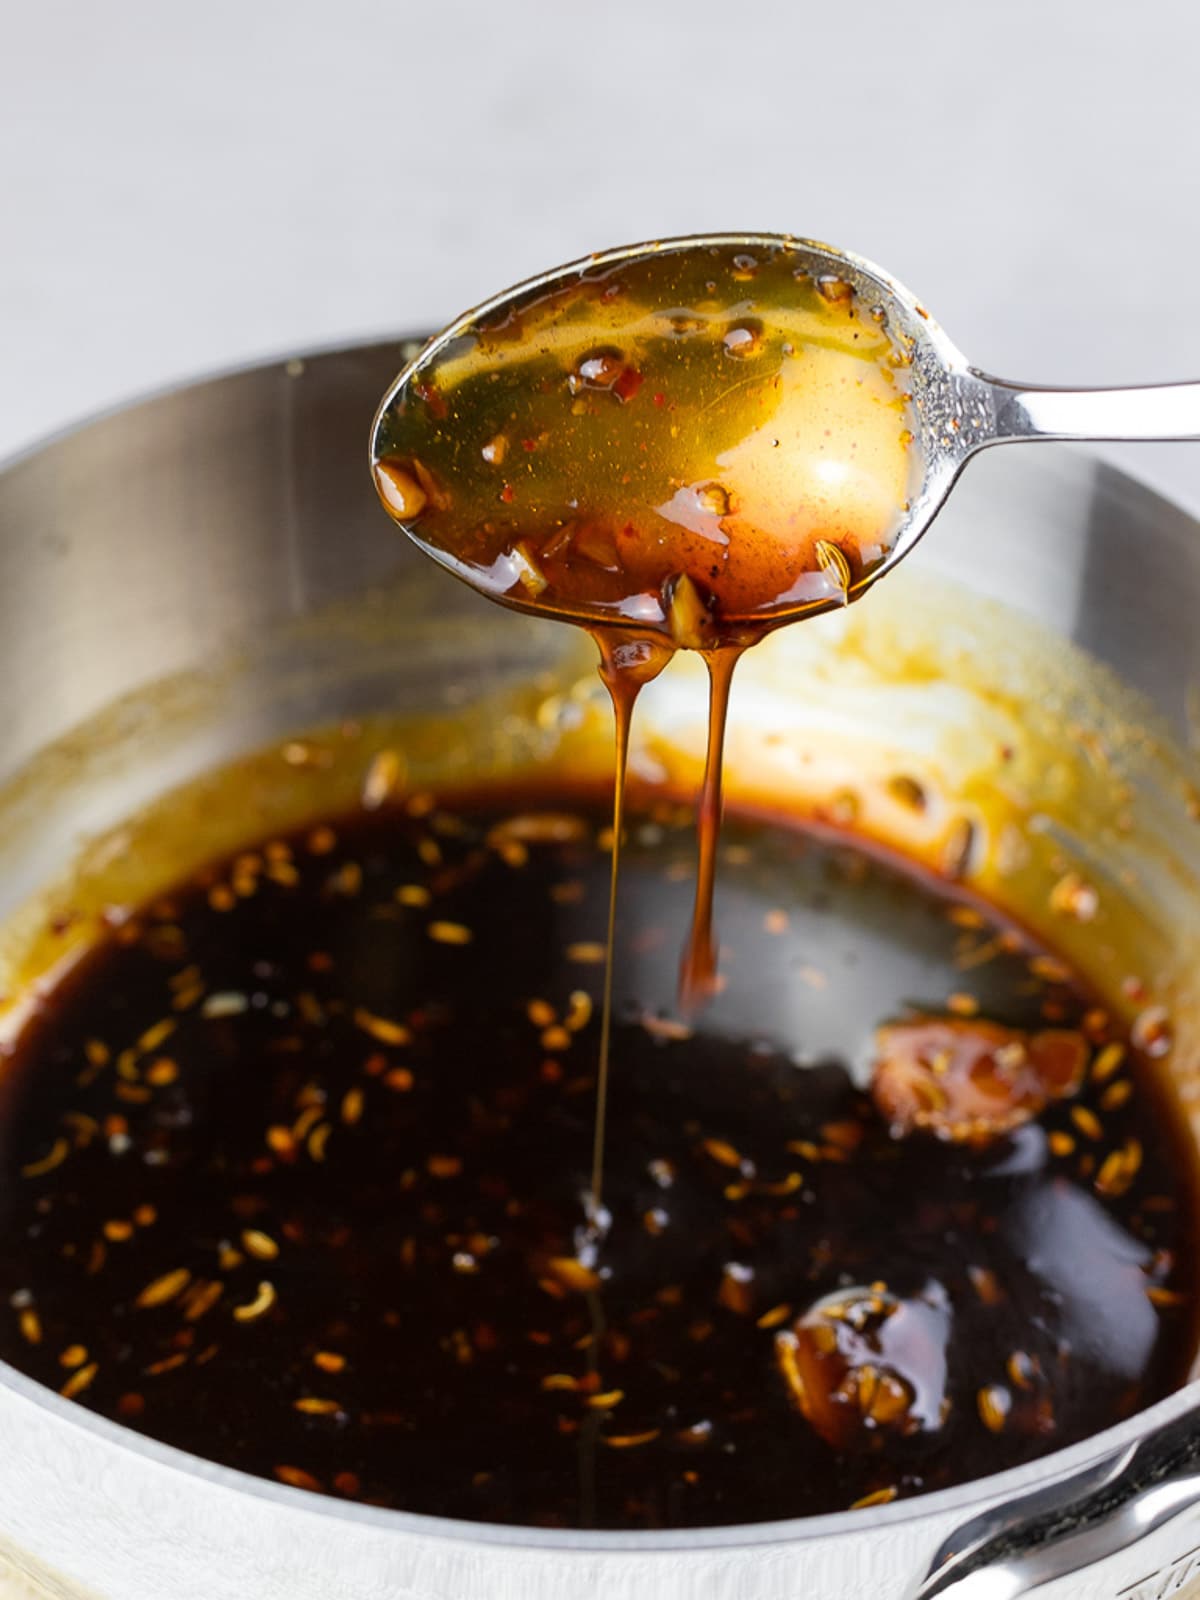 Sweet and tangy soy glaze dripping from a spoon